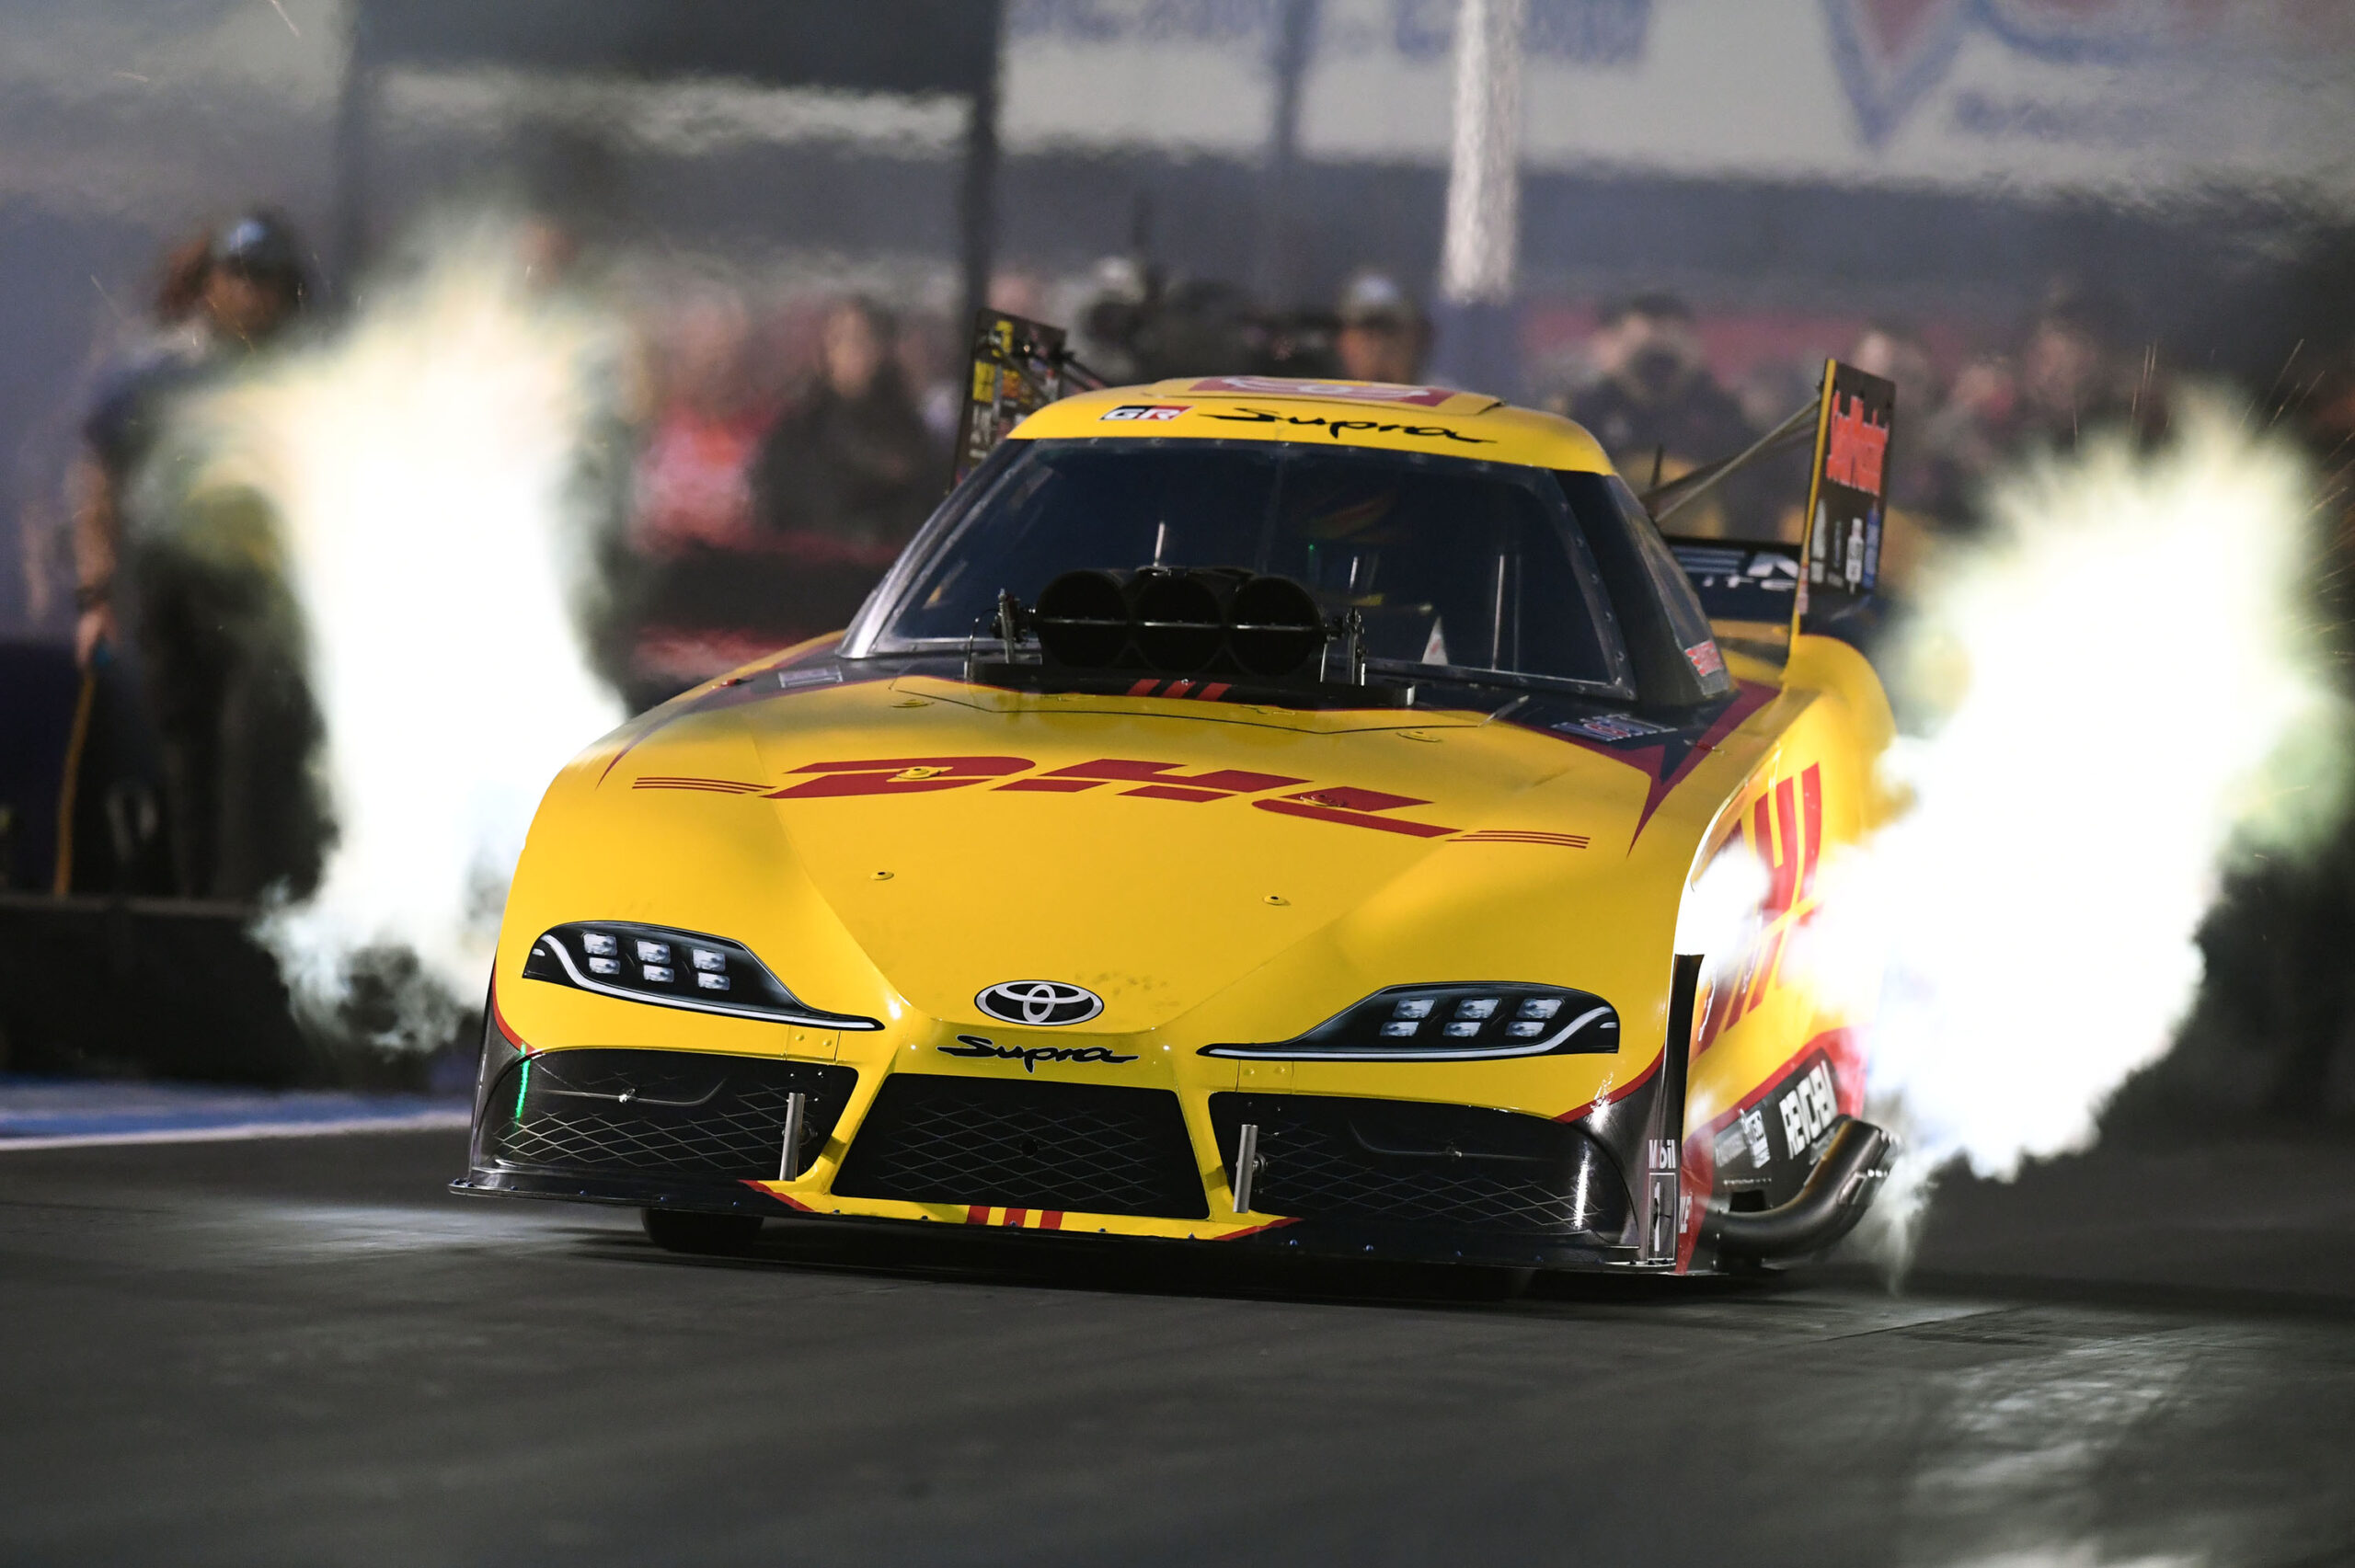 YPSILANTI, Mich. (March 4, 2024) — In one of the longest-running and most-successful sports marketing partnerships, DHL and Kalitta Motorsports signed a multi-year contract extension for J.R. Todd’s DHL GR Supra Funny Car, the team announced today. The 2024 NHRA Mission Foods Drag Racing Series begins Friday at the Amalie Oil NHRA Gatornationals in Gainesville, Fla.